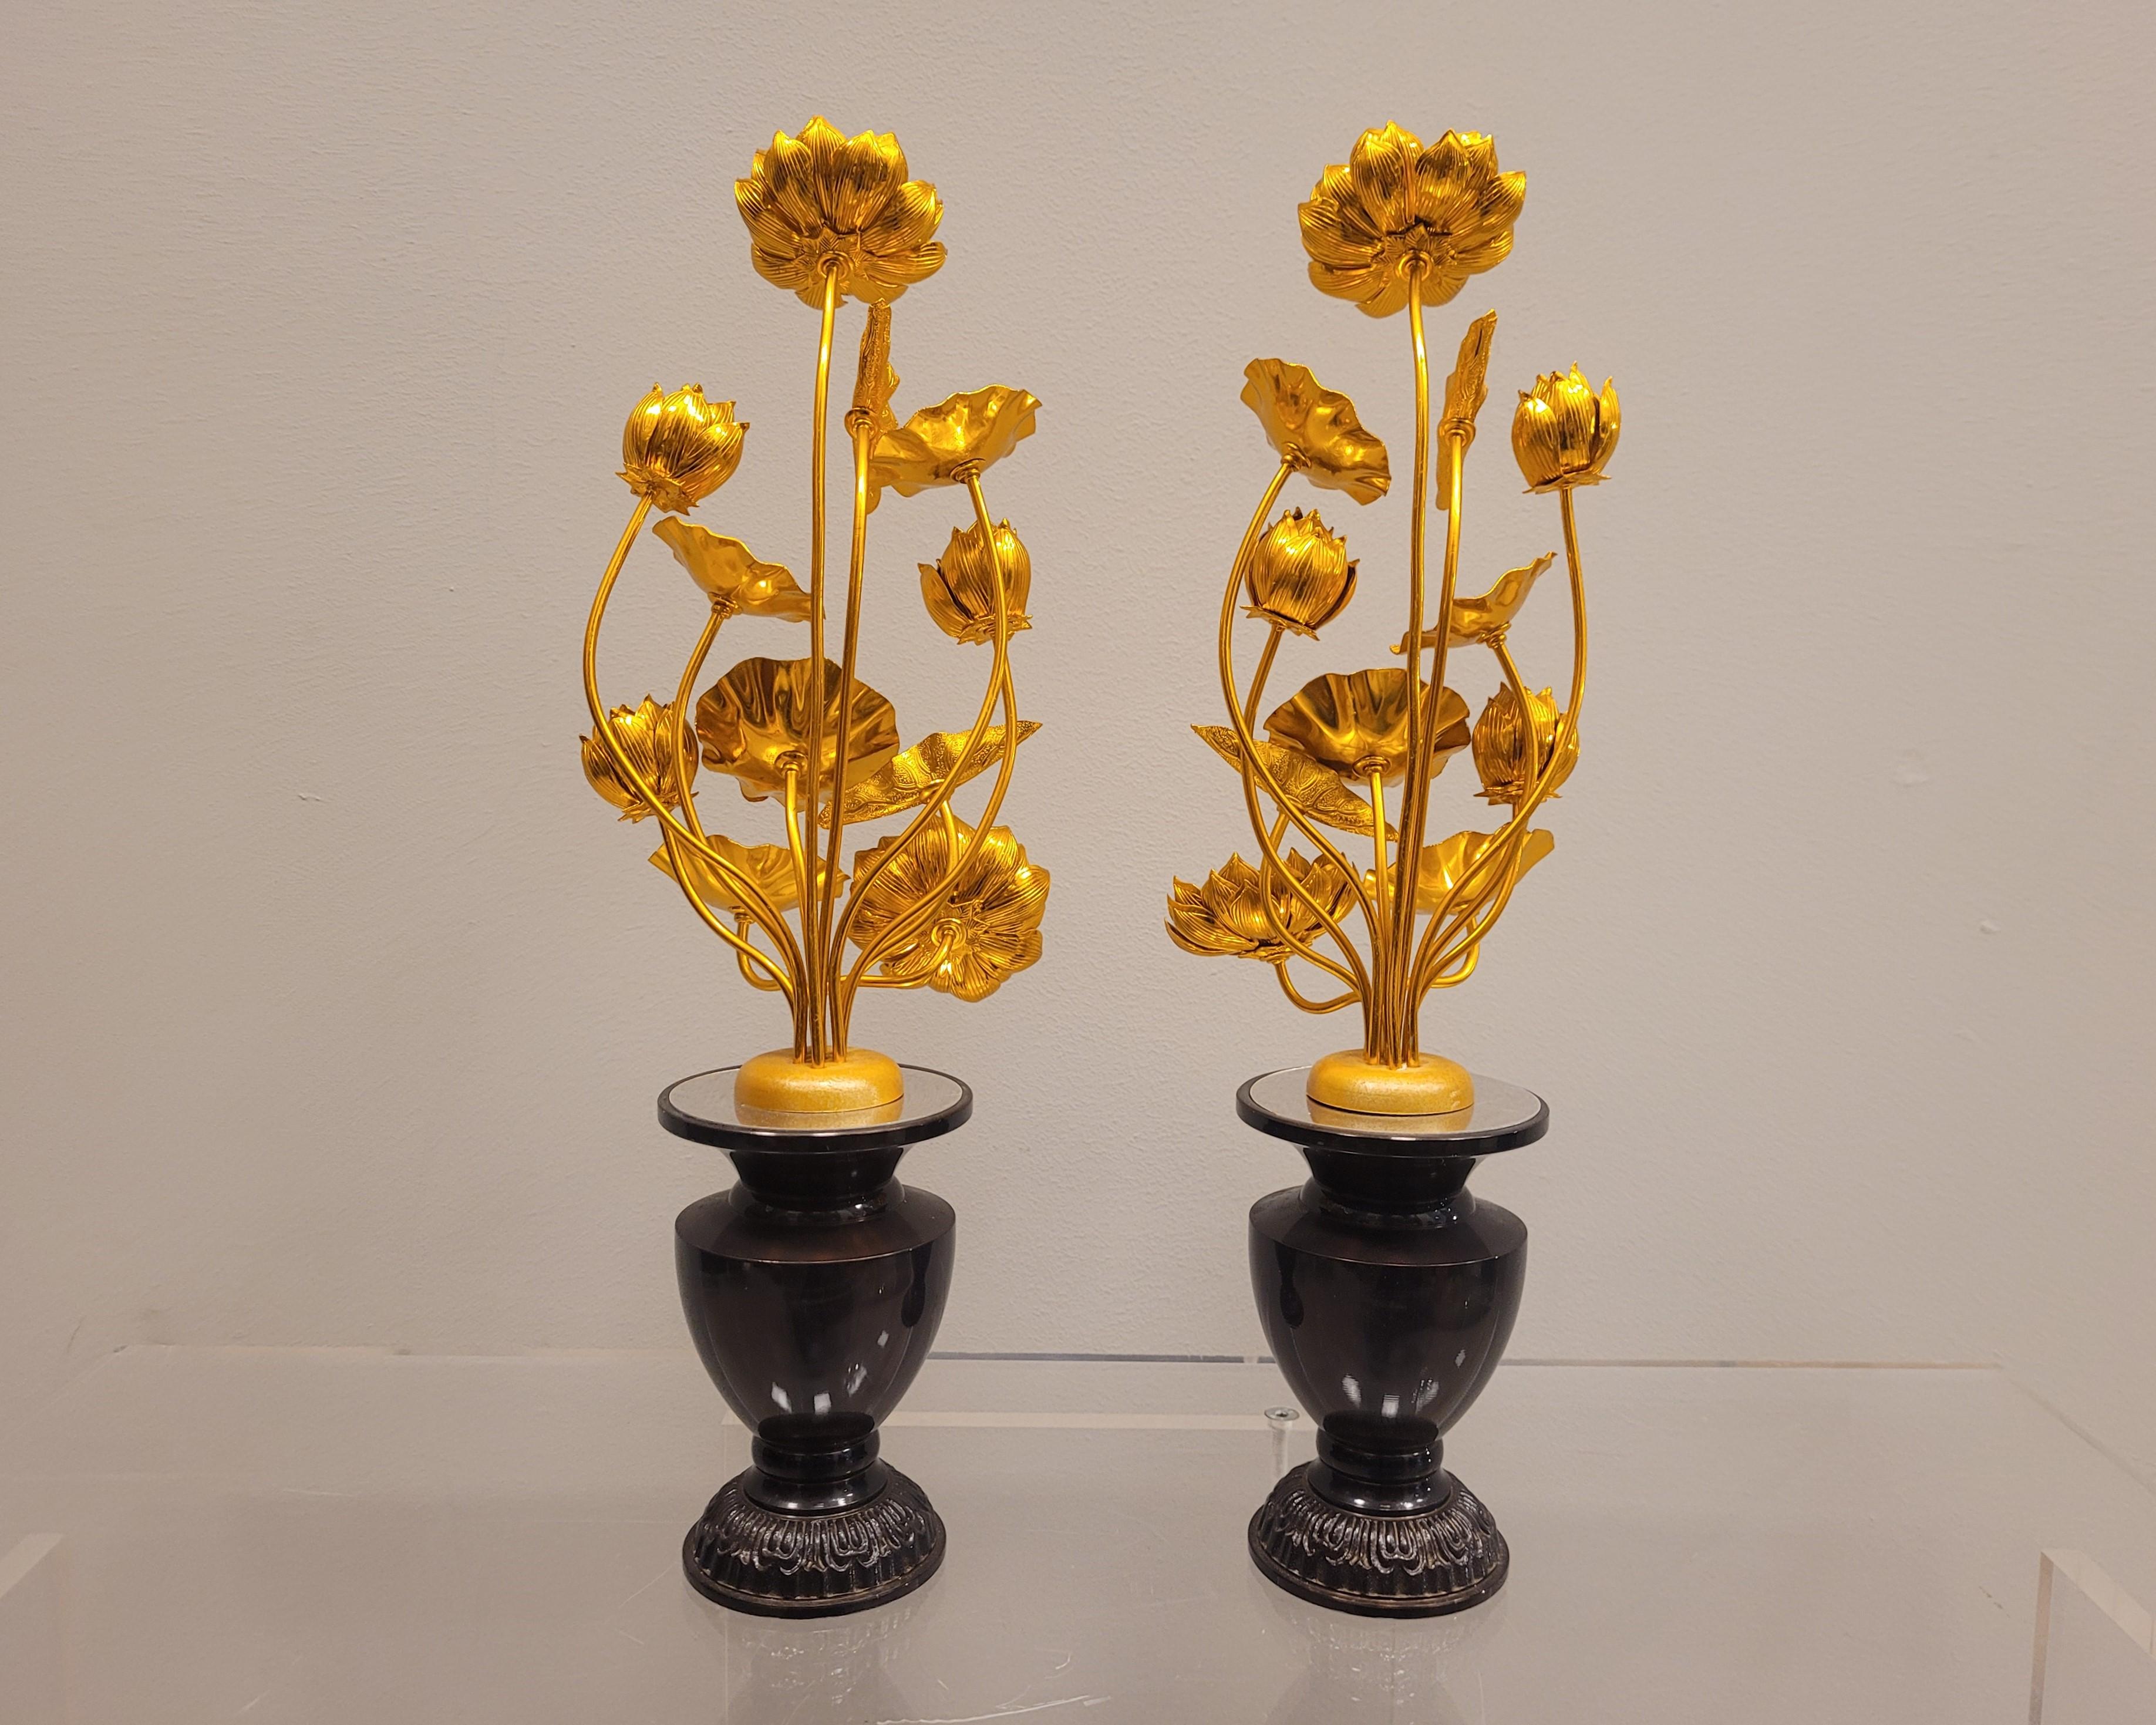 Spectacular pair of temple vases filled with golden lotus flowers. This set is called 